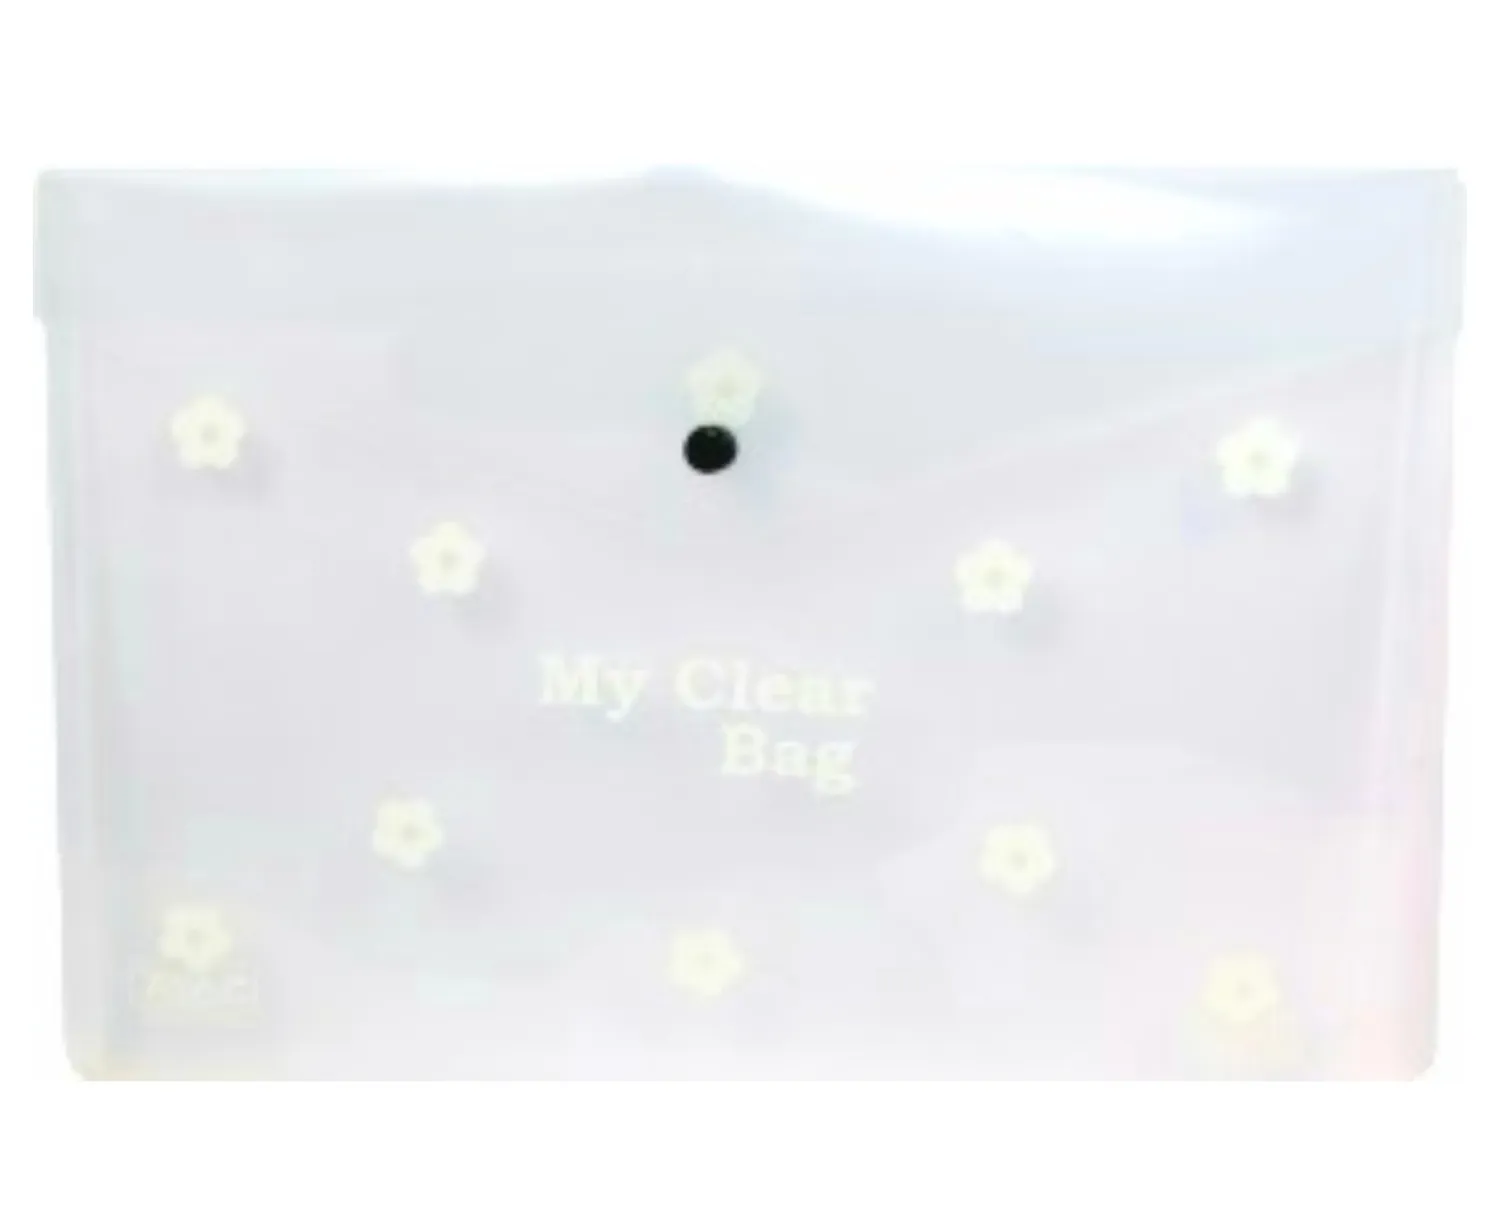 Saya My Clear Bag Flower, SY- 209F 1 Button Folder, 35.5X 25.5 cm, Pack of 1 , White Color